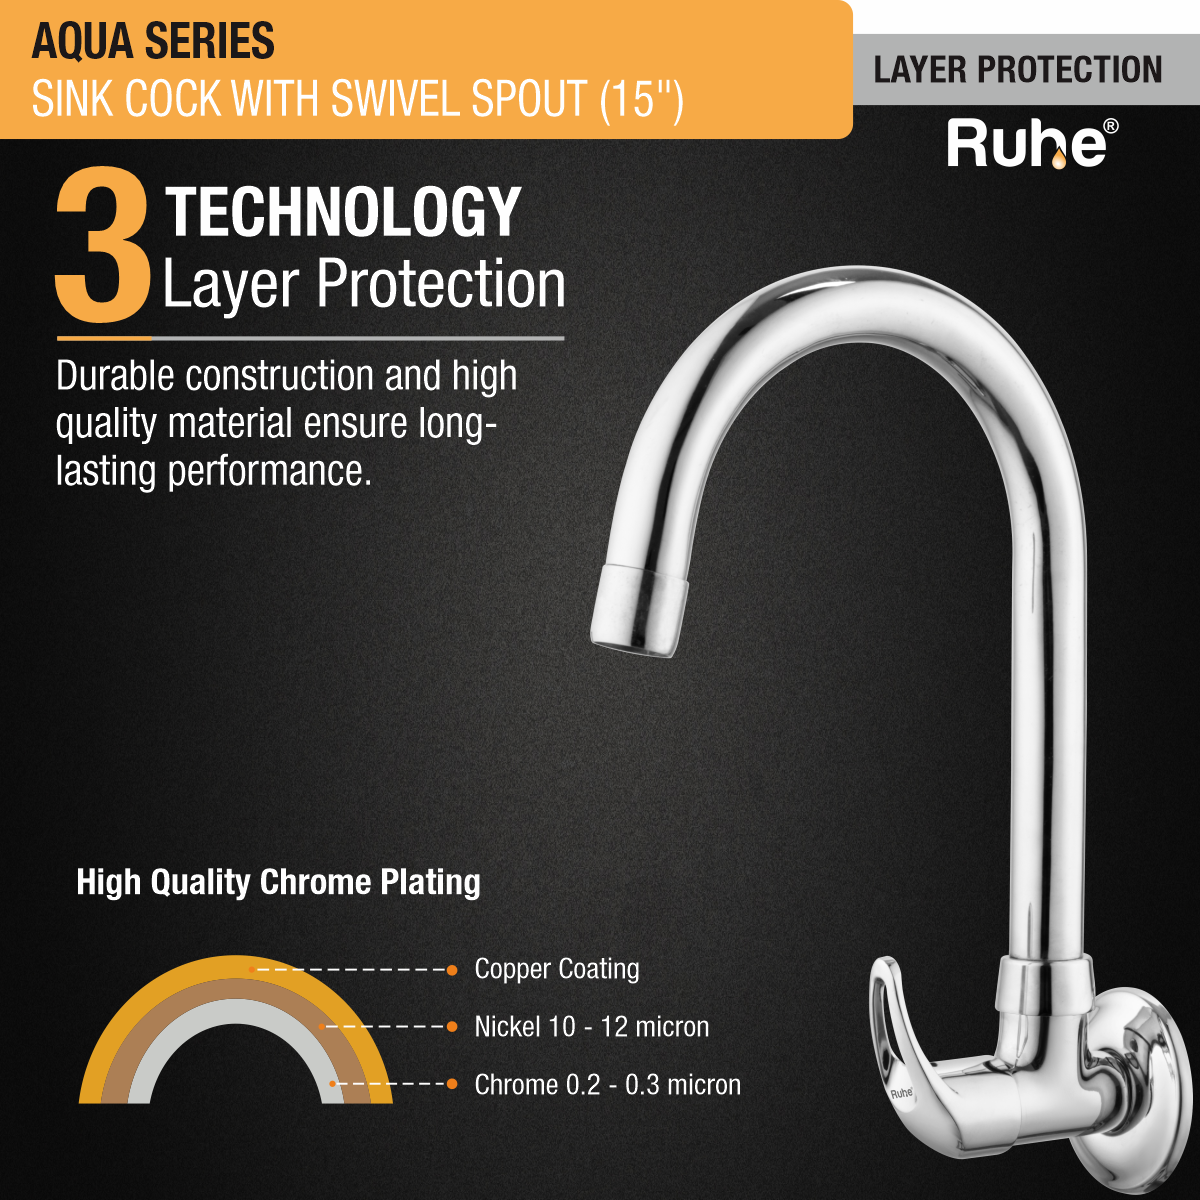 Aqua Sink Tap with Medium (15 inches) Round Swivel Spout Faucet 3 layer protection